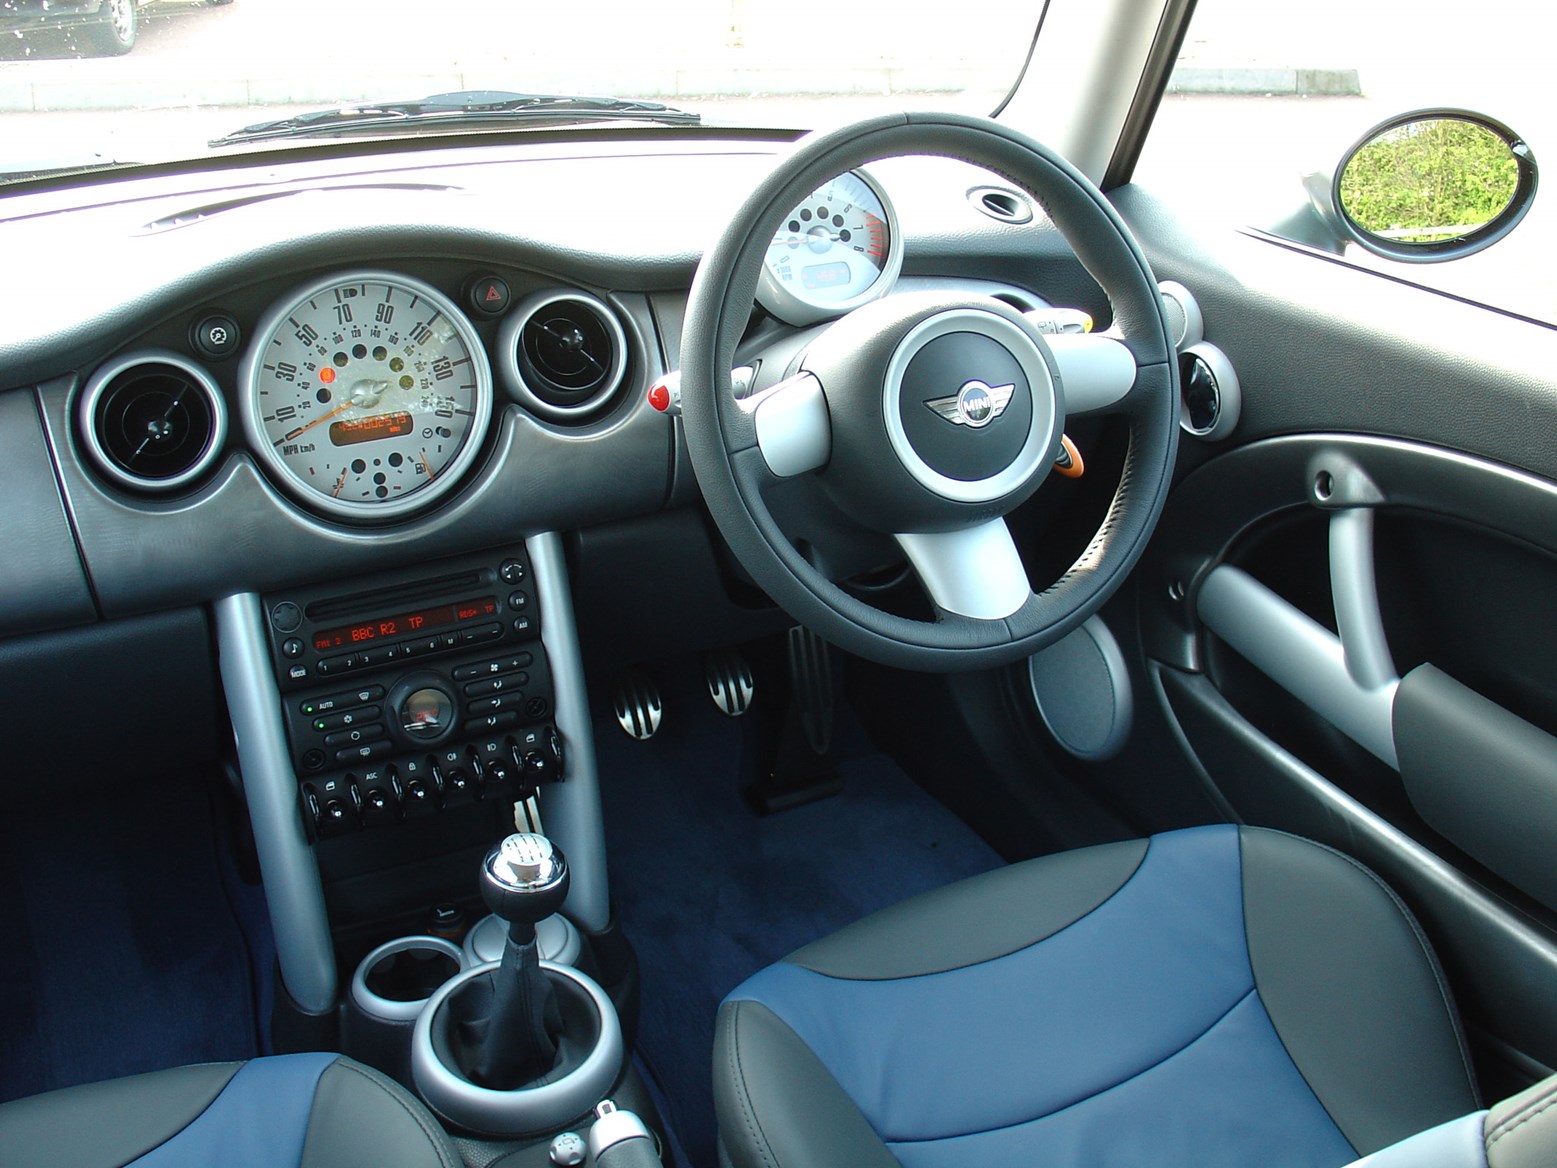 MINI Cooper S Hatchback Review (2002 - 2006) | Parkers